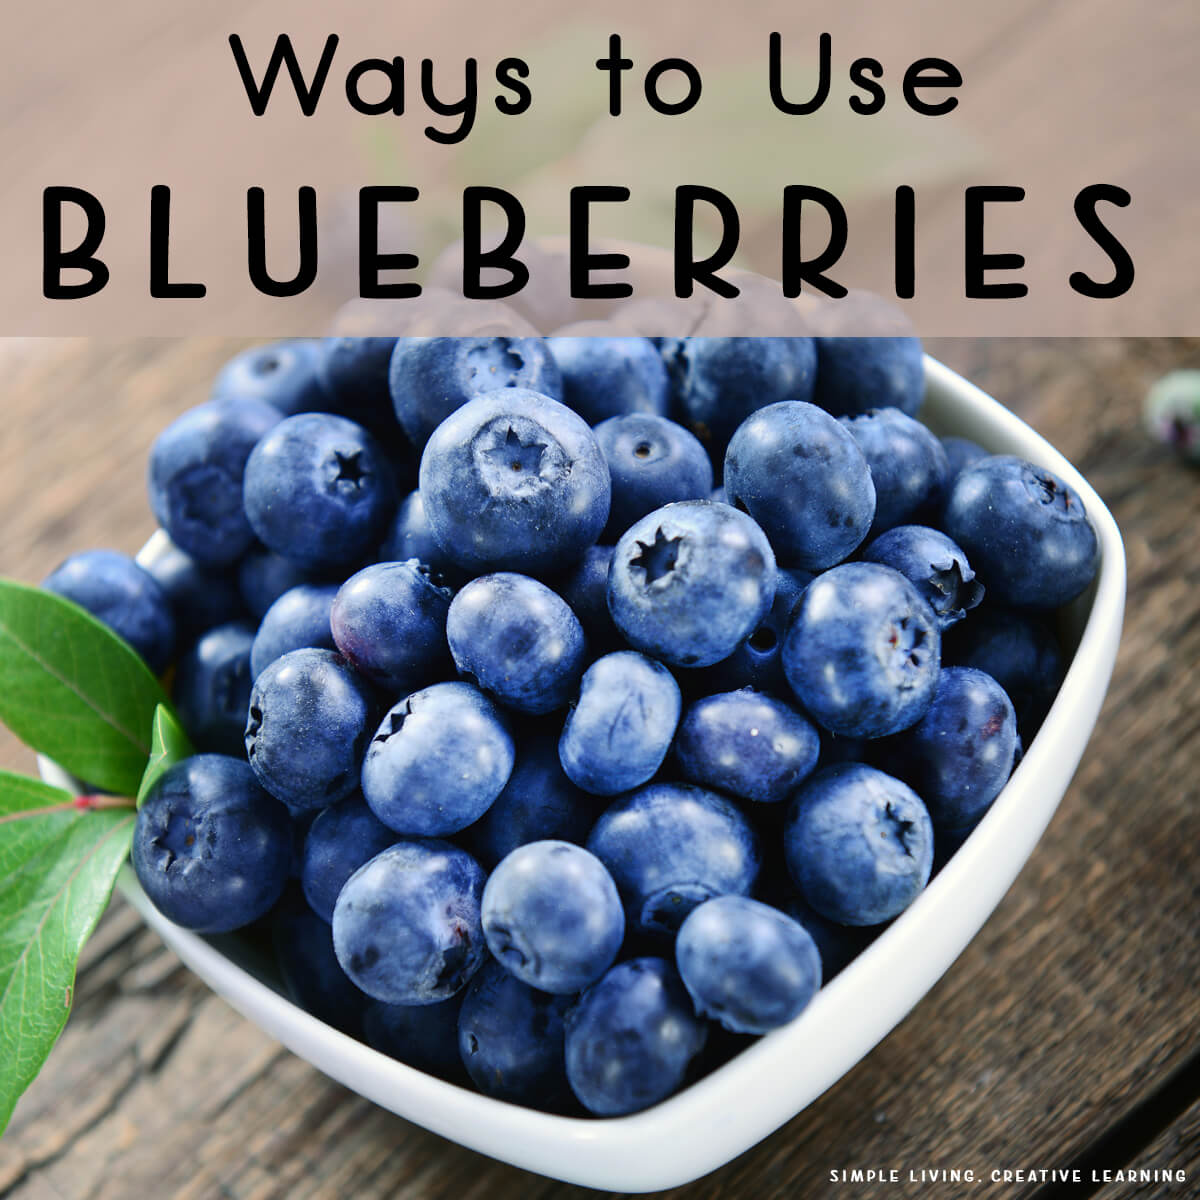 Ways to Use Blueberries - blueberries in a white bowl